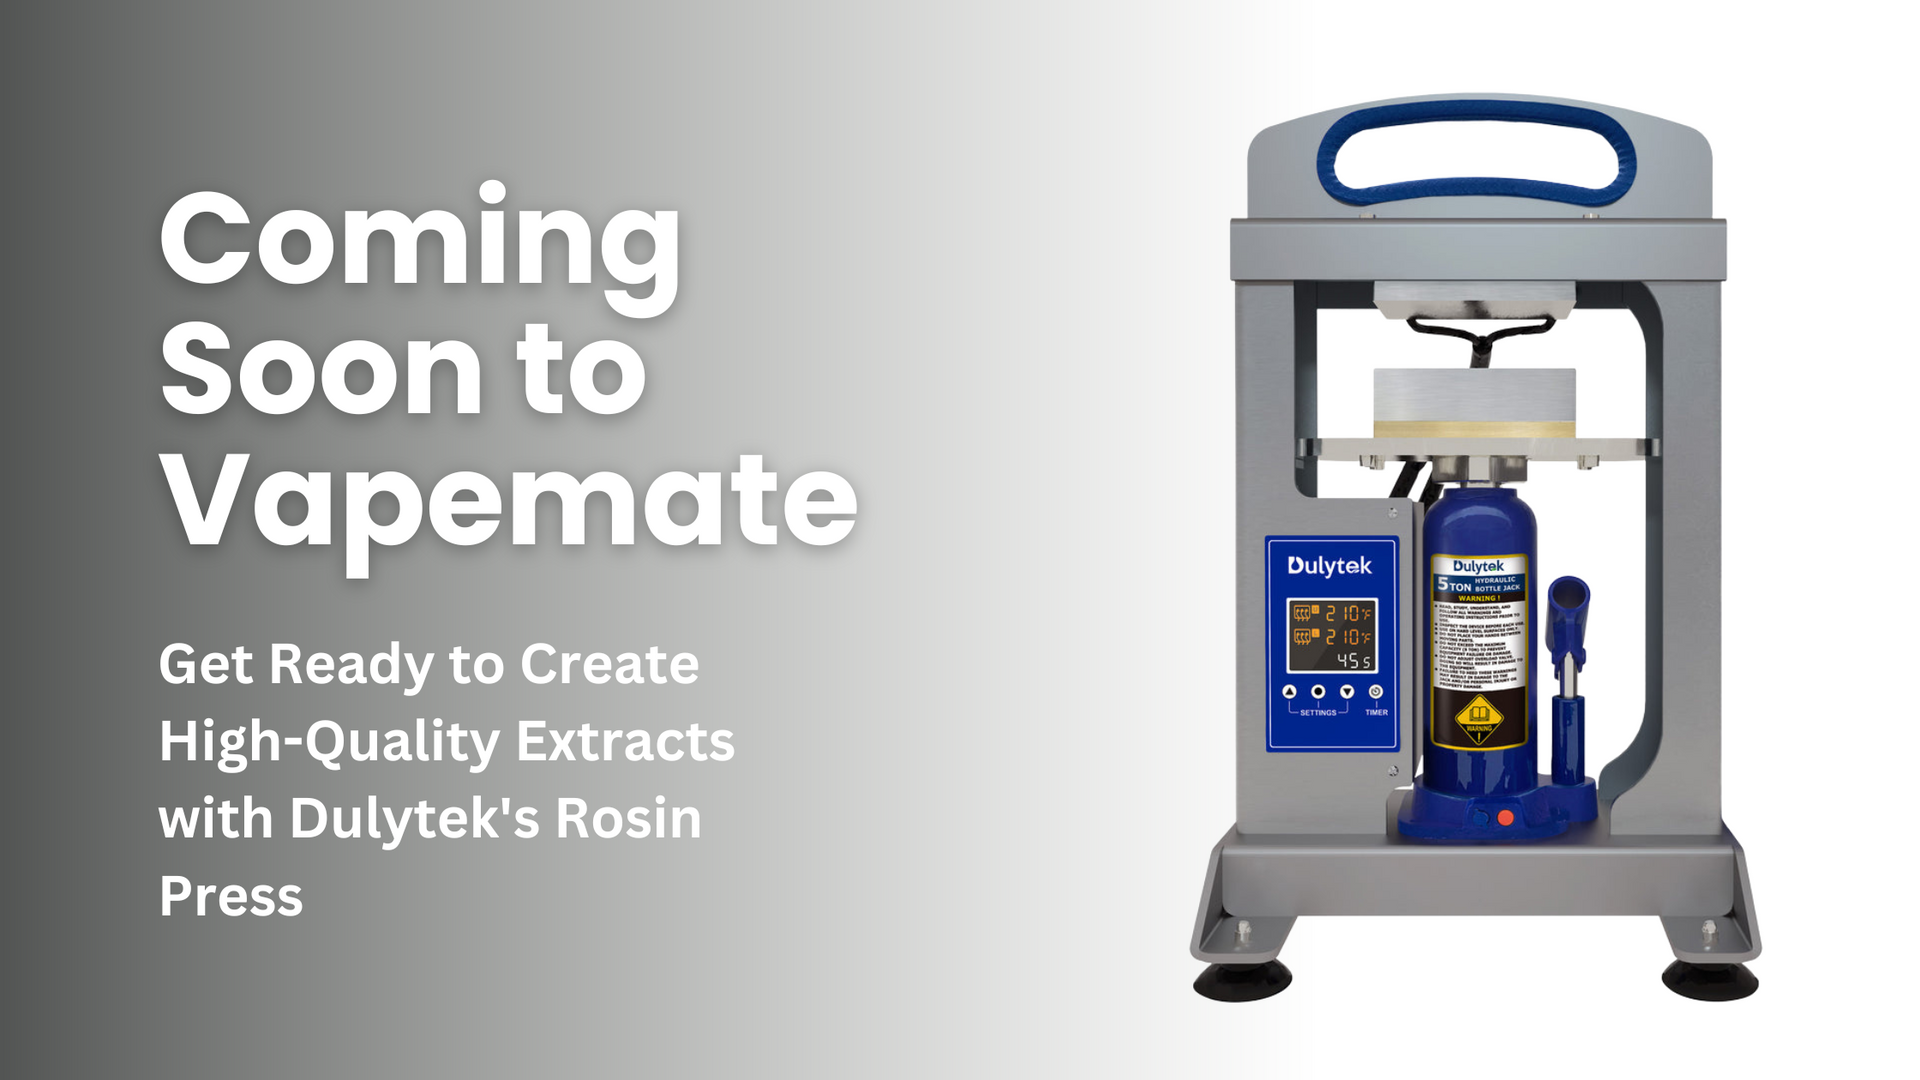 Get Ready to Create High-Quality Extracts with Dulytek's Rosin Press - Coming Soon to Vapemate!